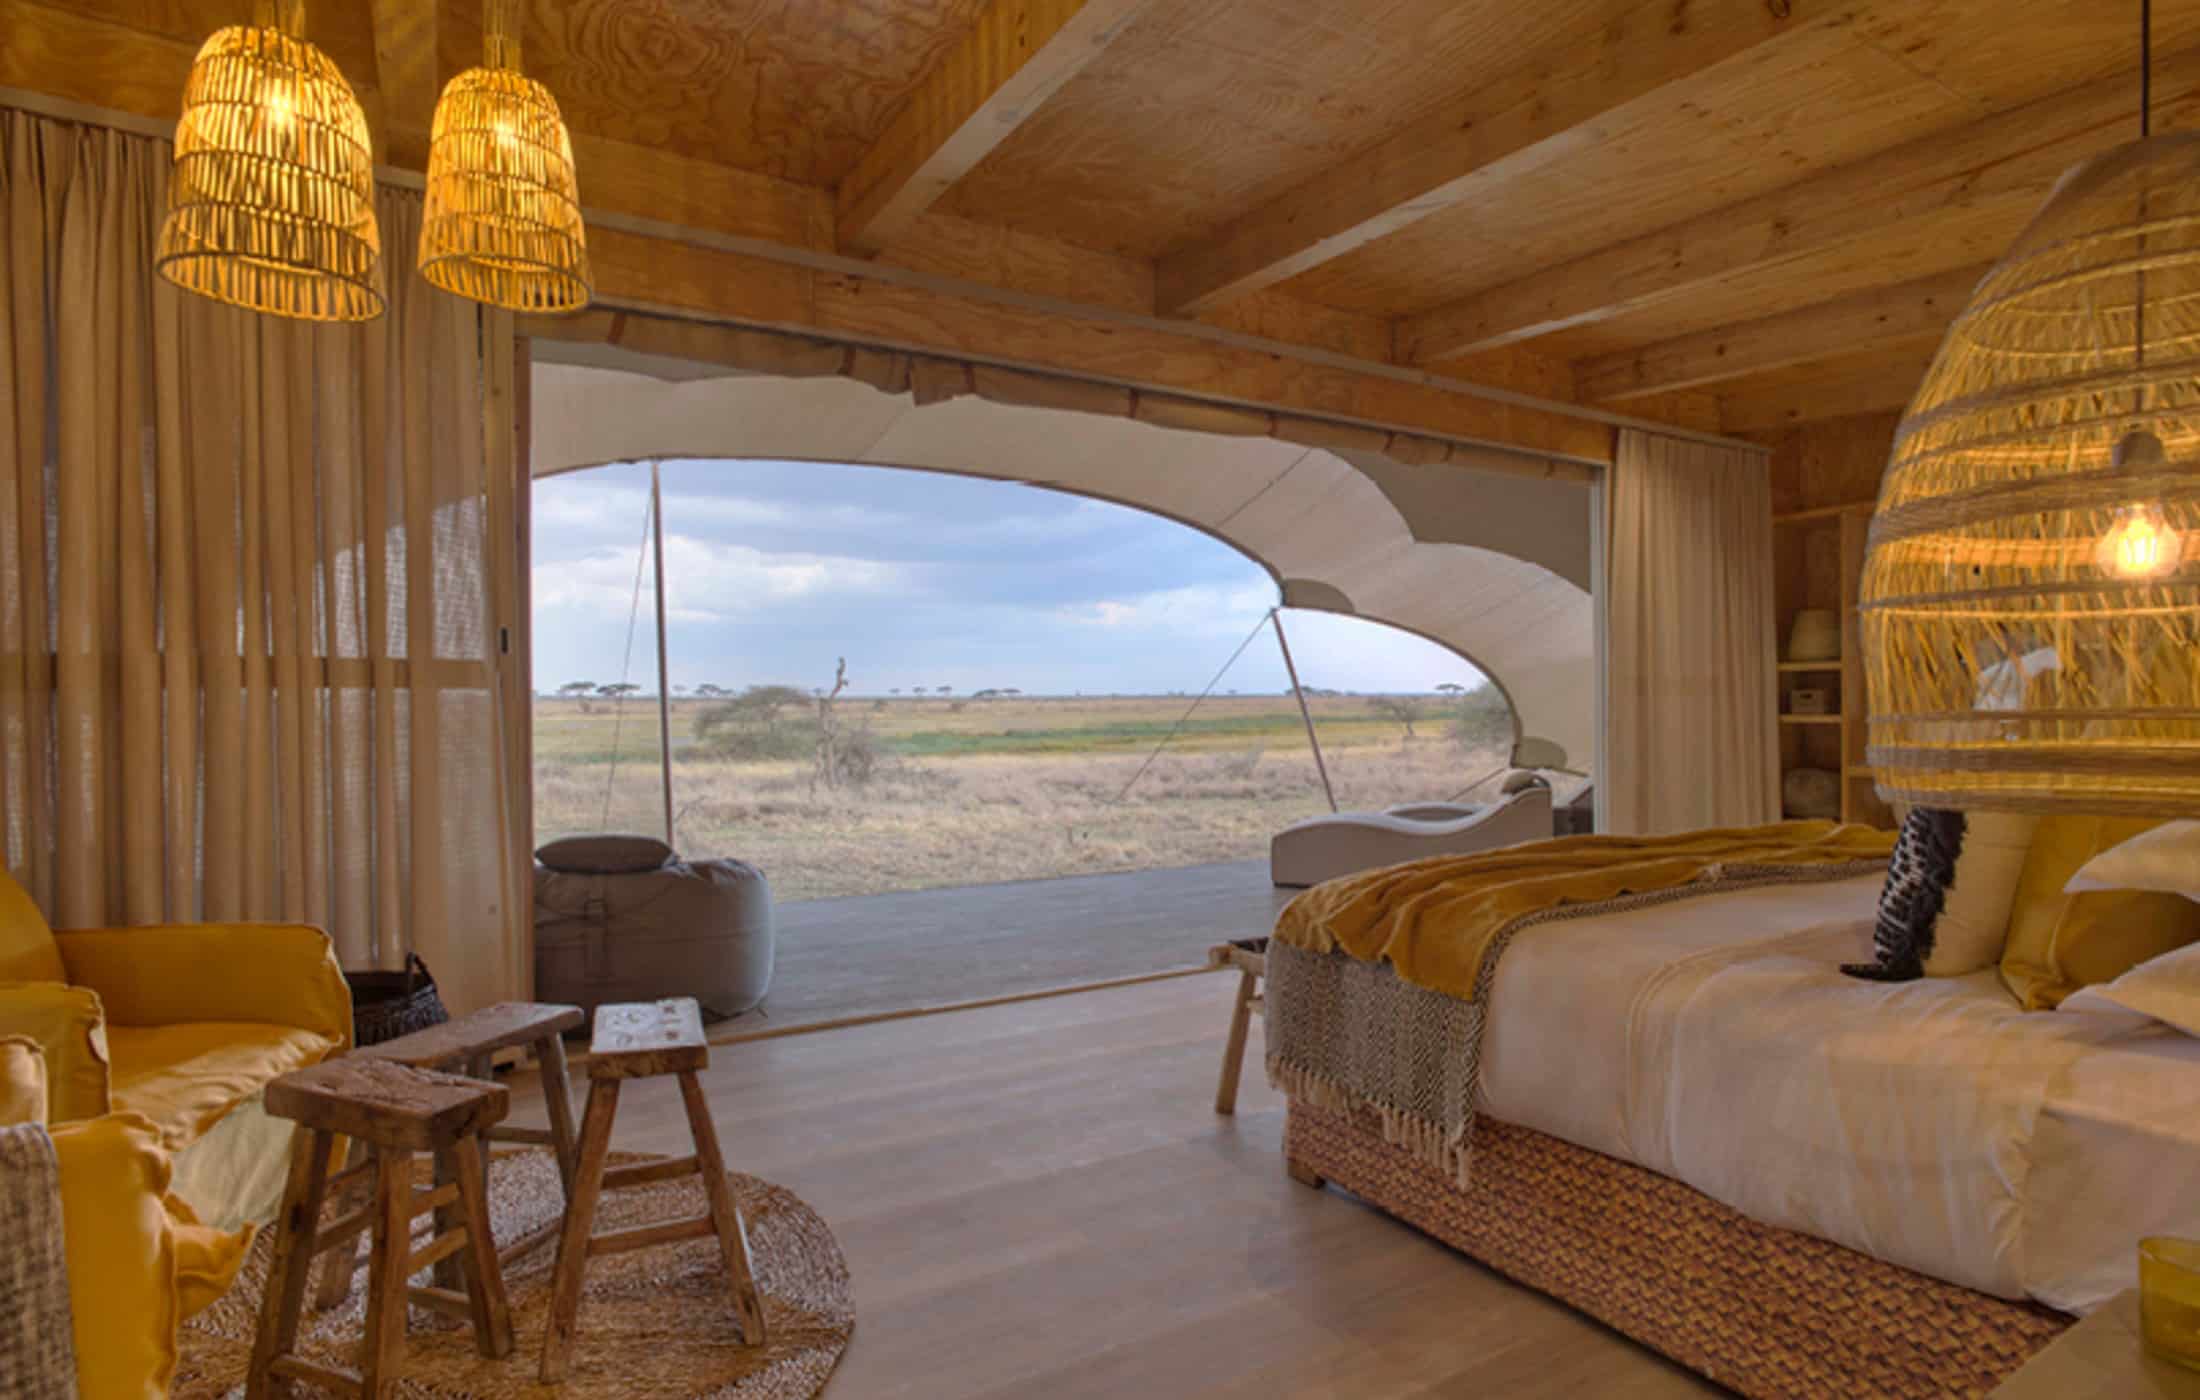 A bedroom looking out into the safari